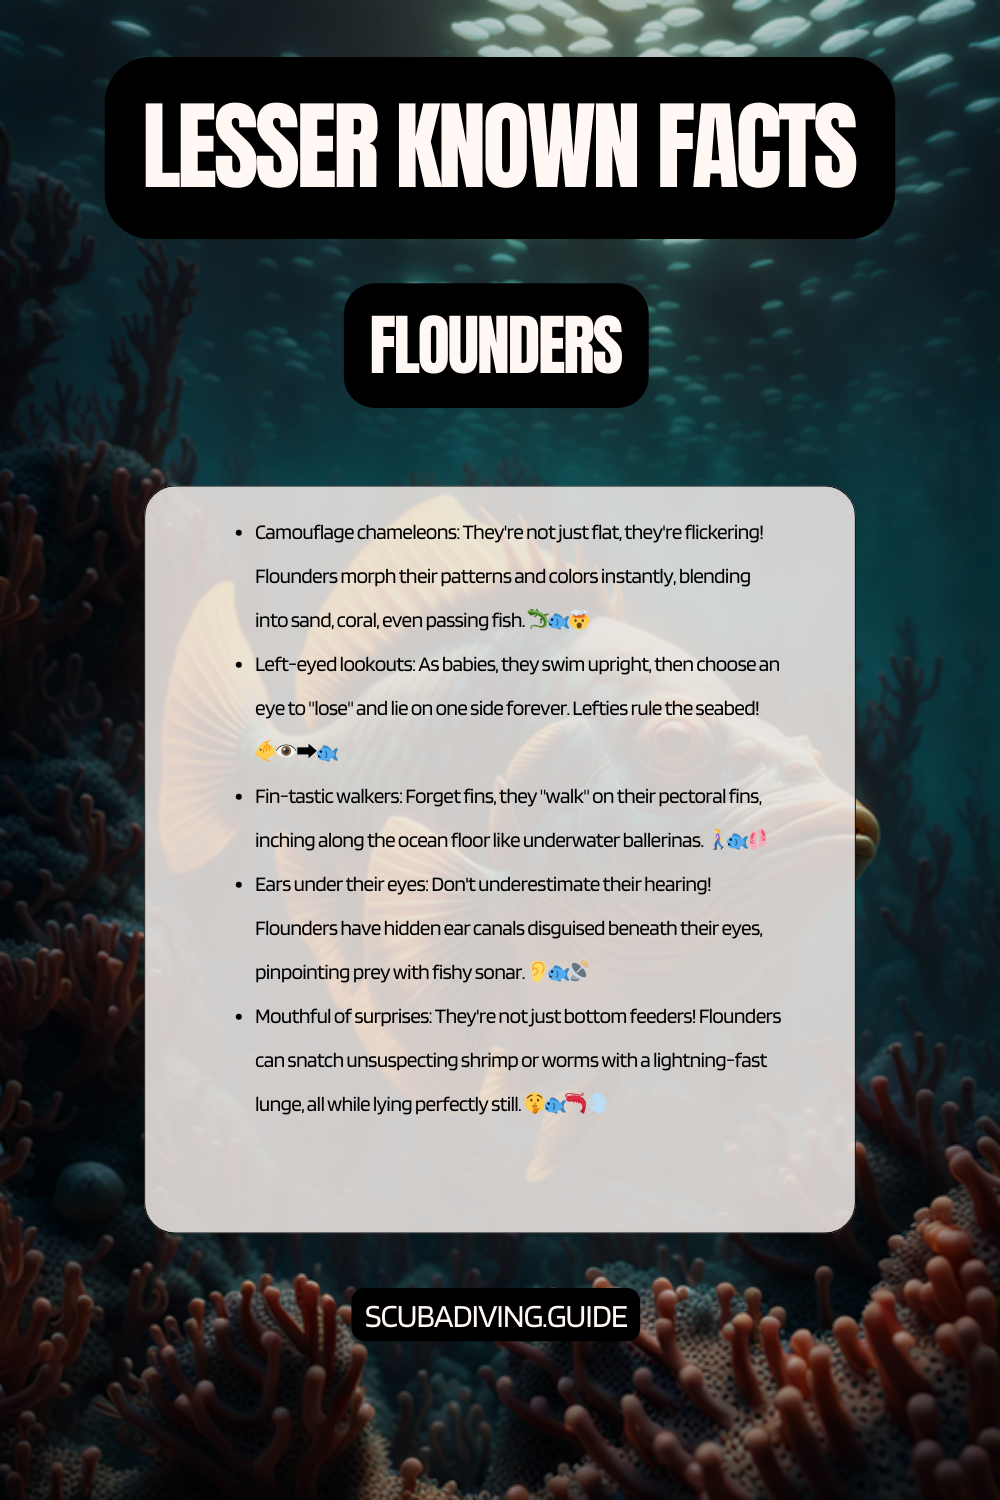 lesser known facts flounders